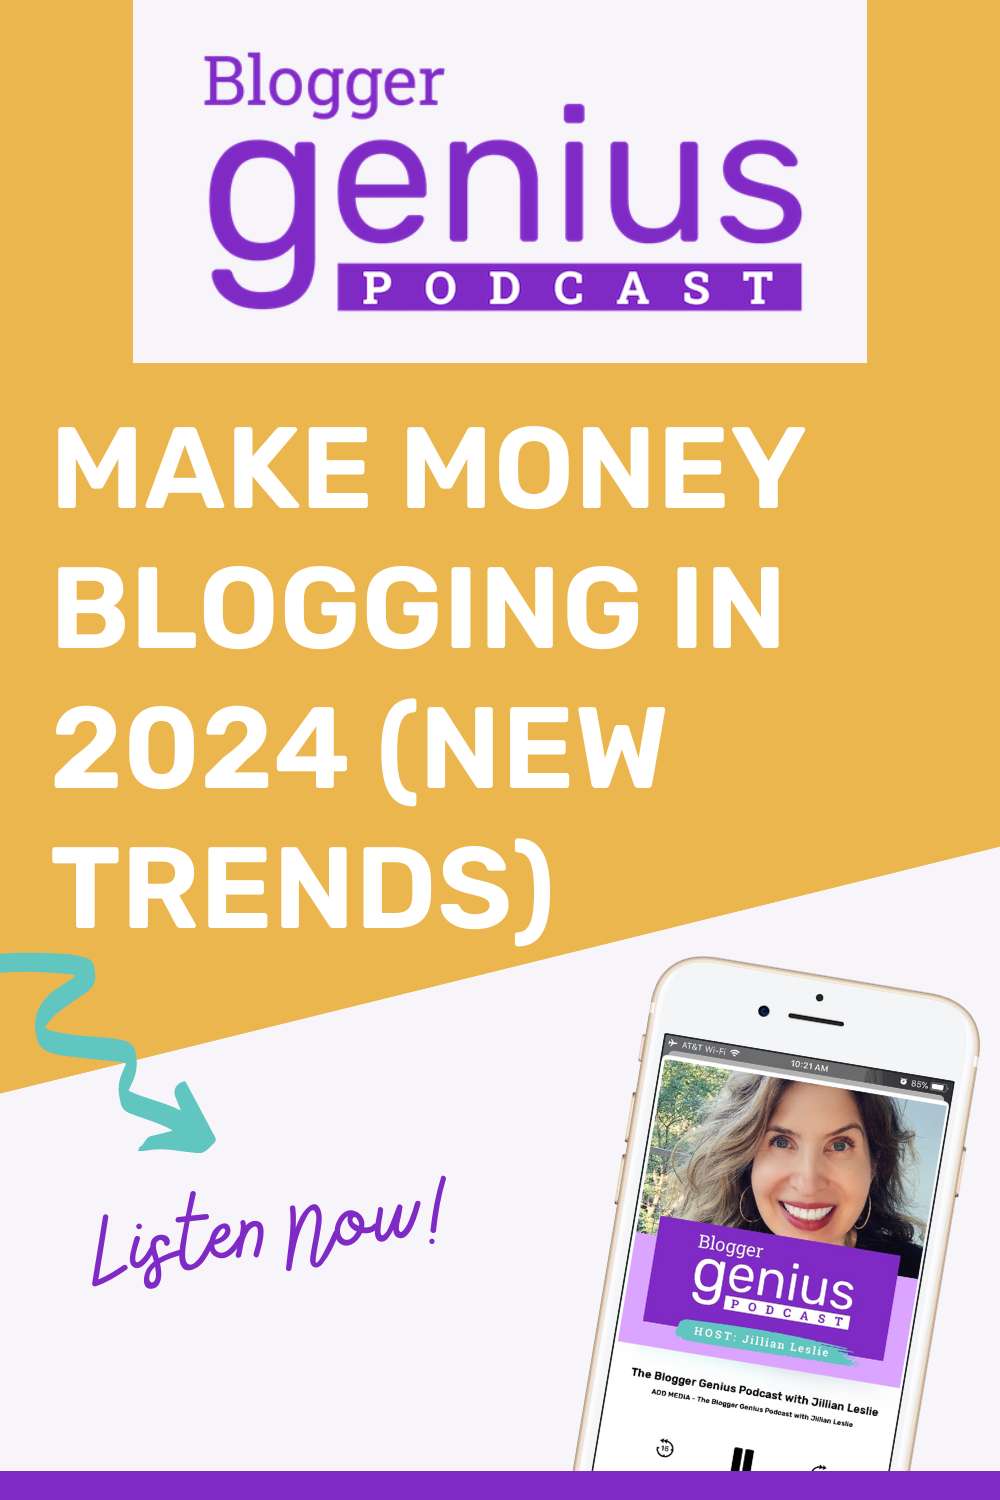 How to Make Money Blogging in 2024    (New Trends) | The Blogger Genius Podcast with Jillian Leslie